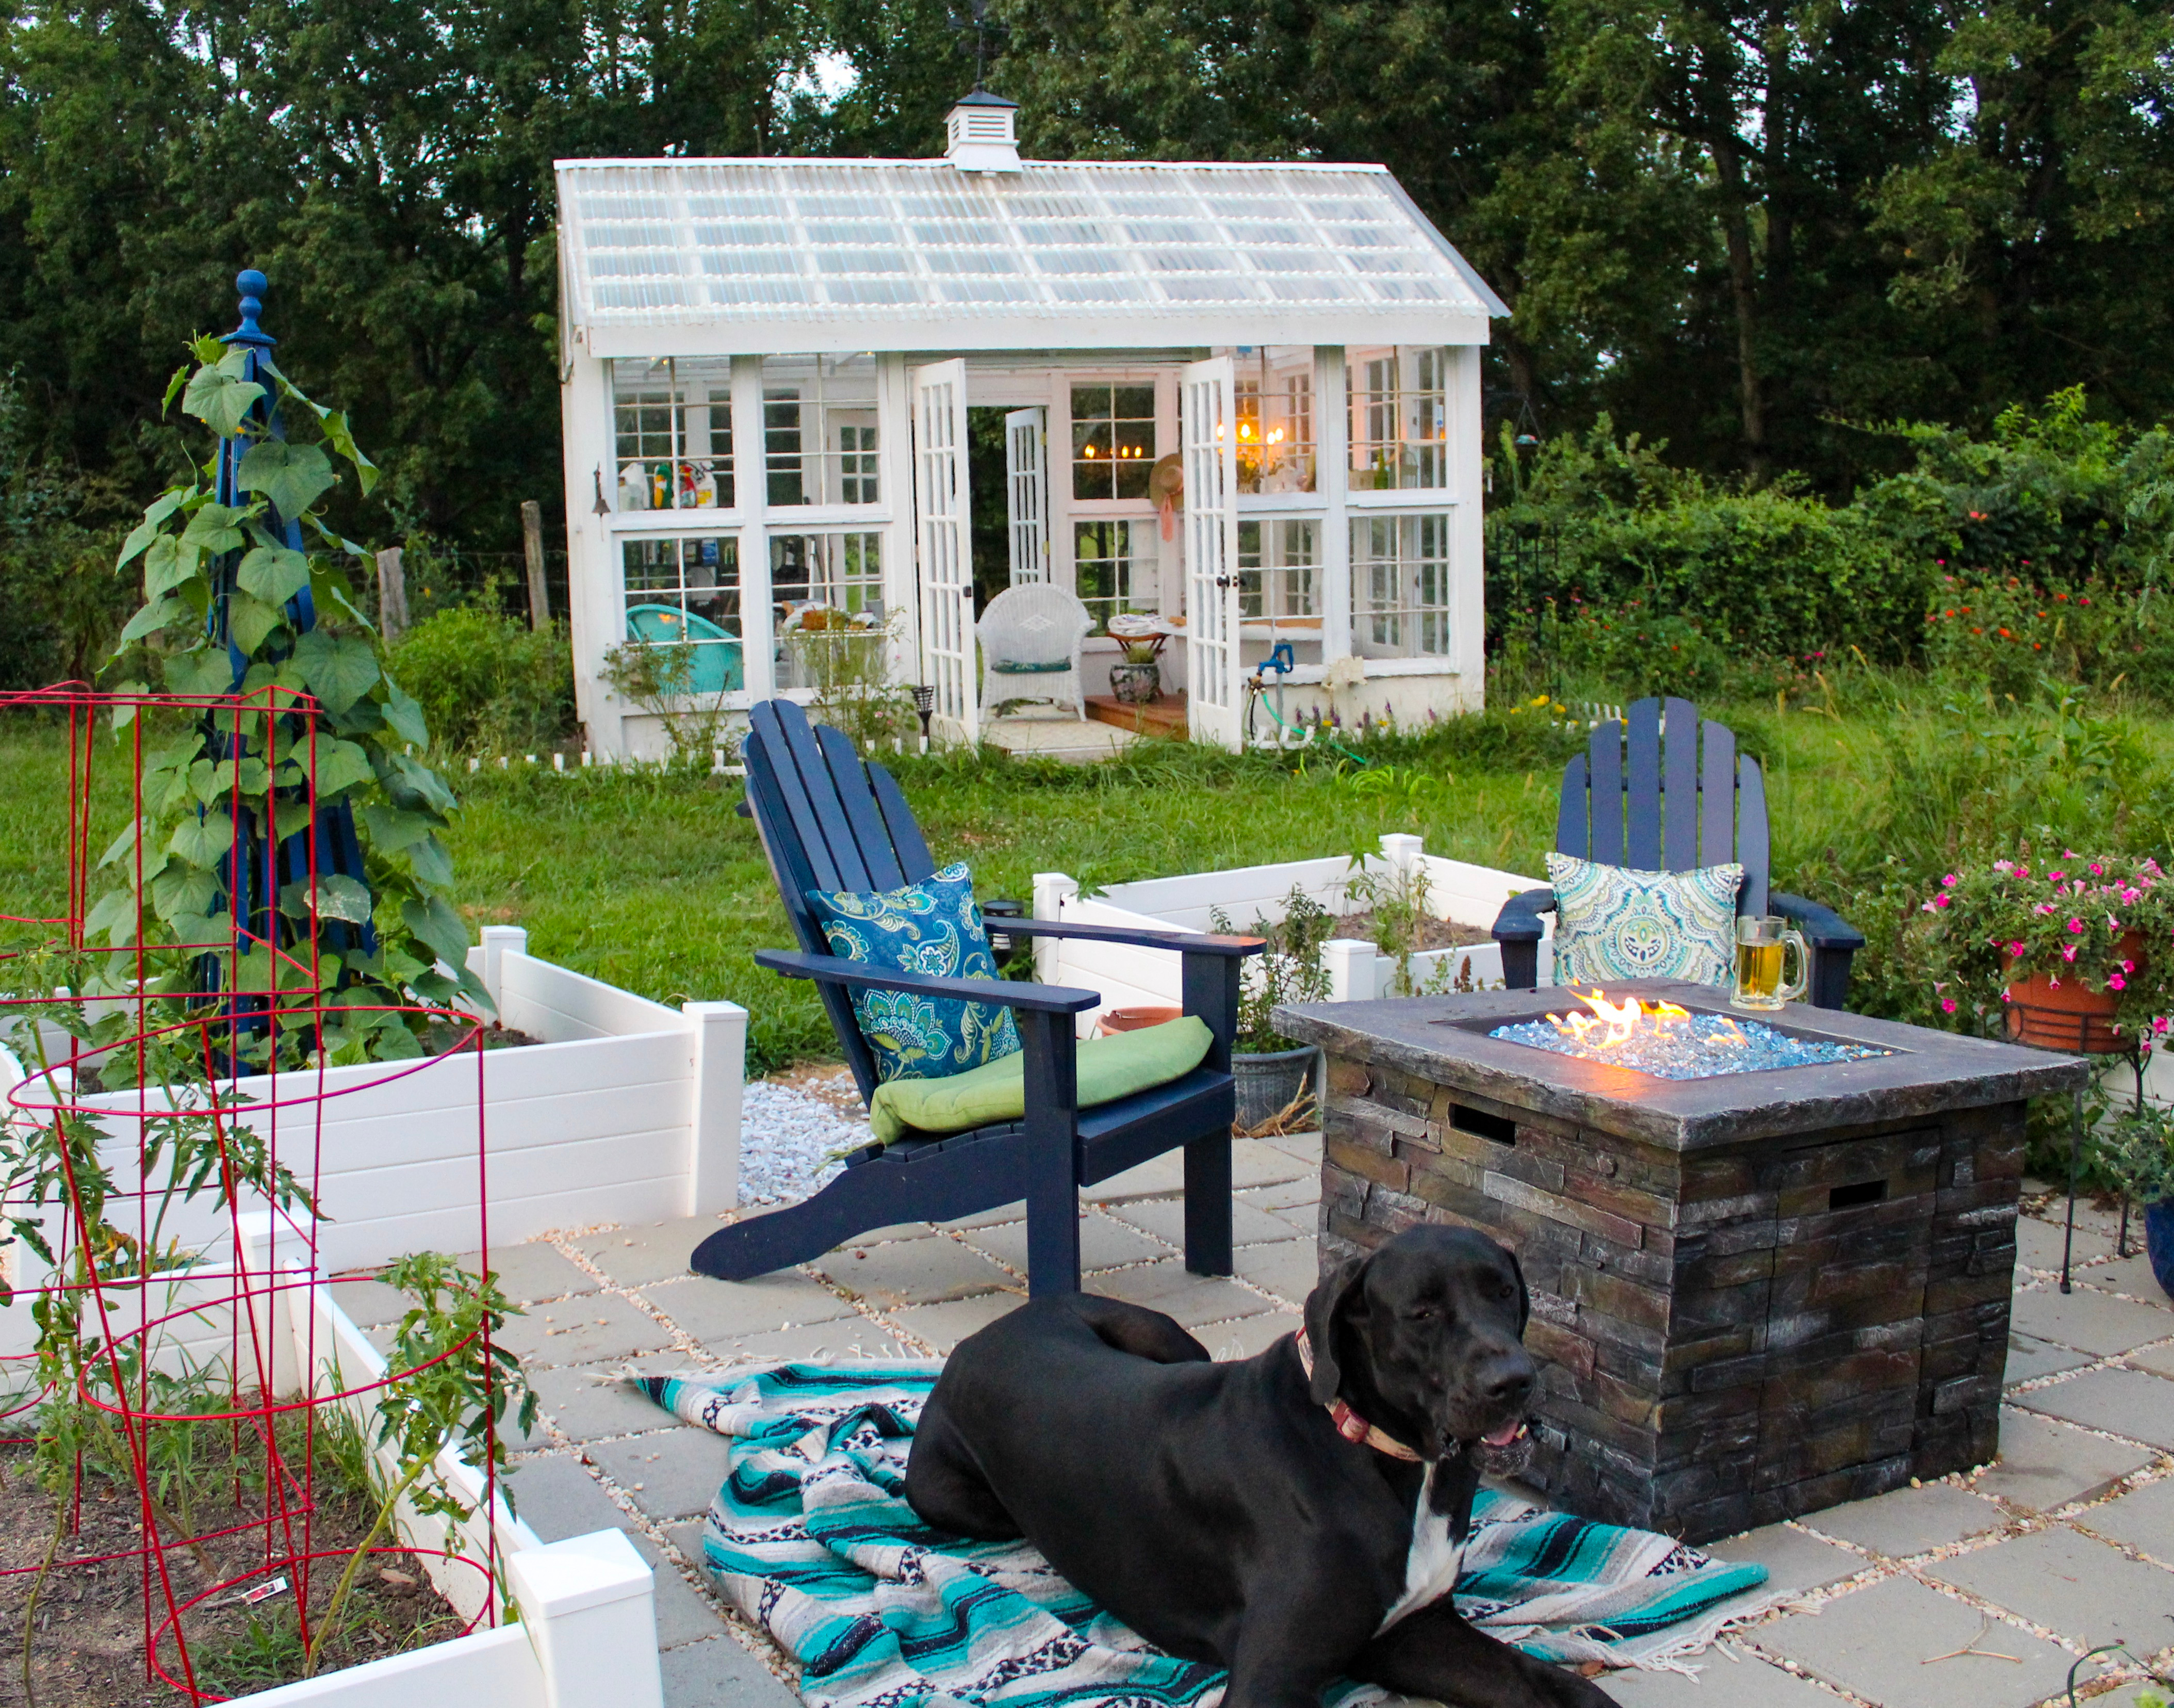 Protect your outdoor living space with extended warranties